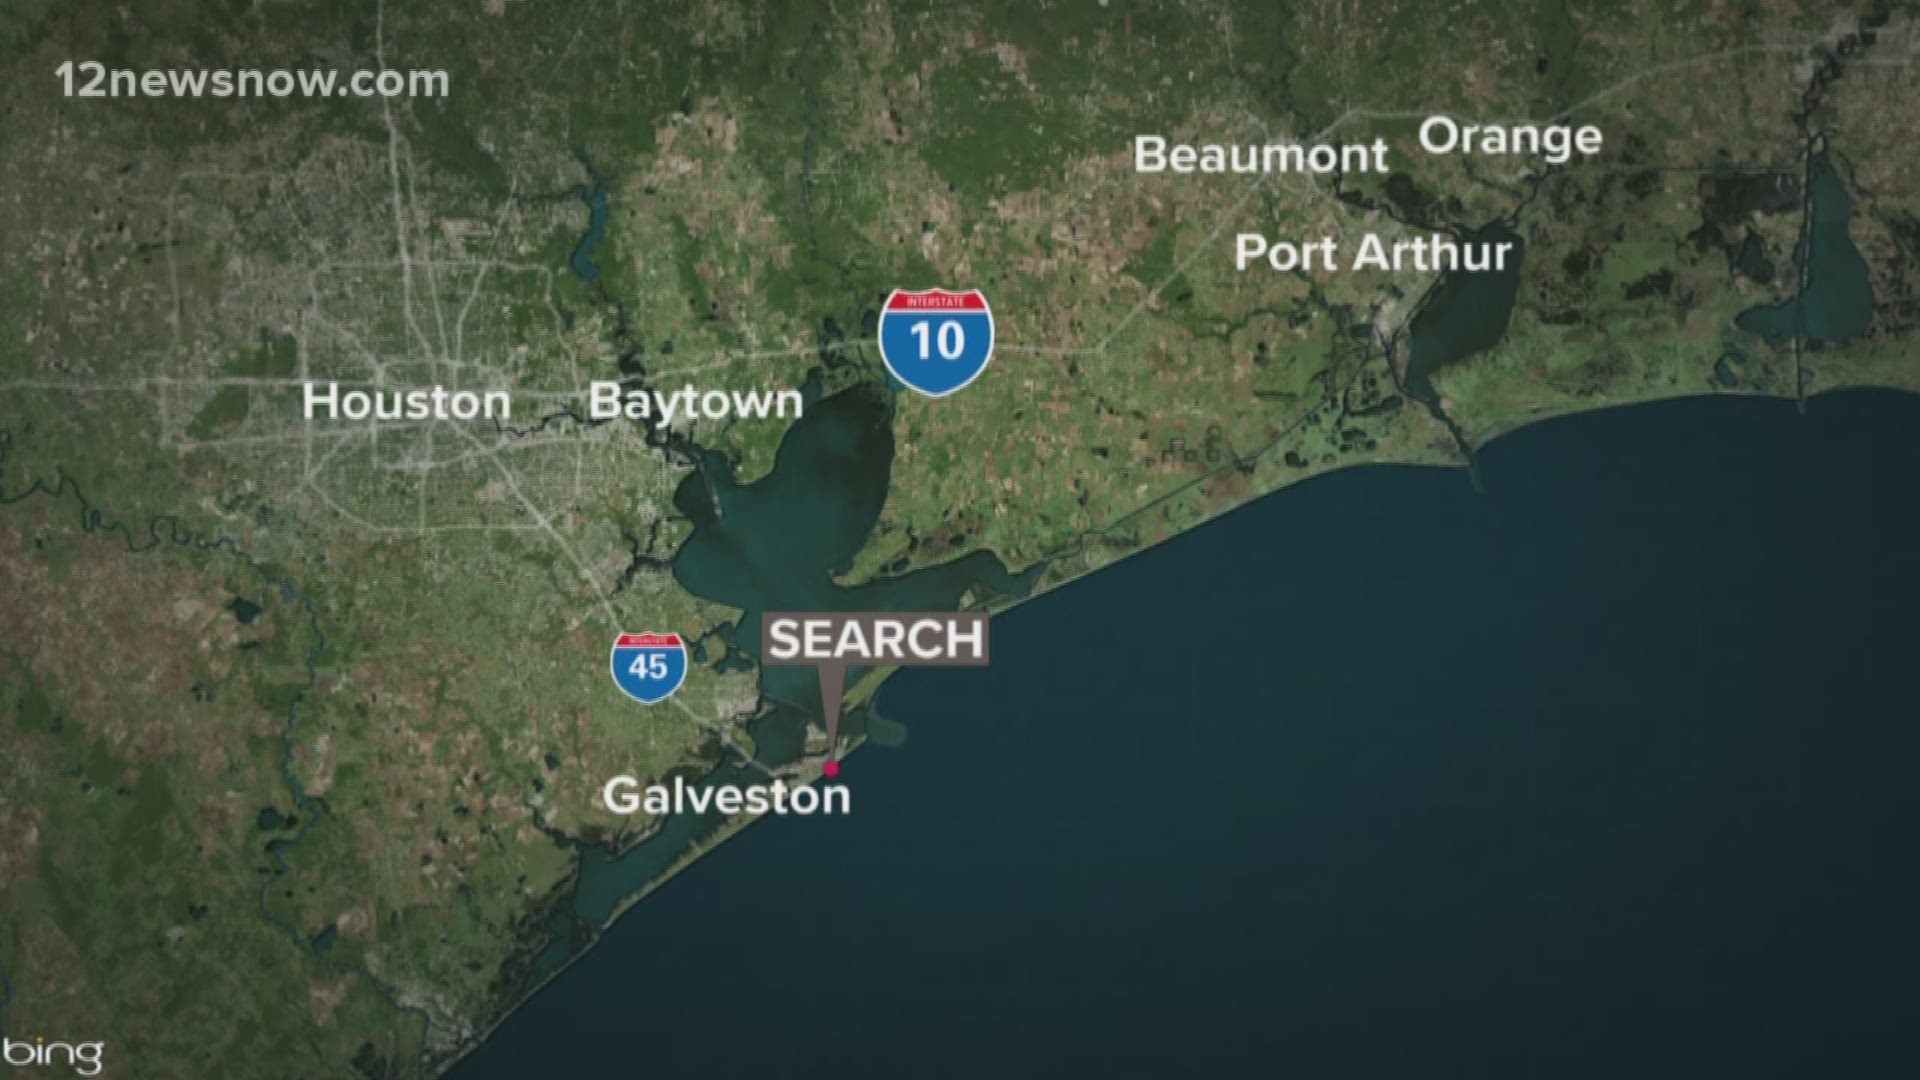 Coast Guard searching for two missing boys near Galveston